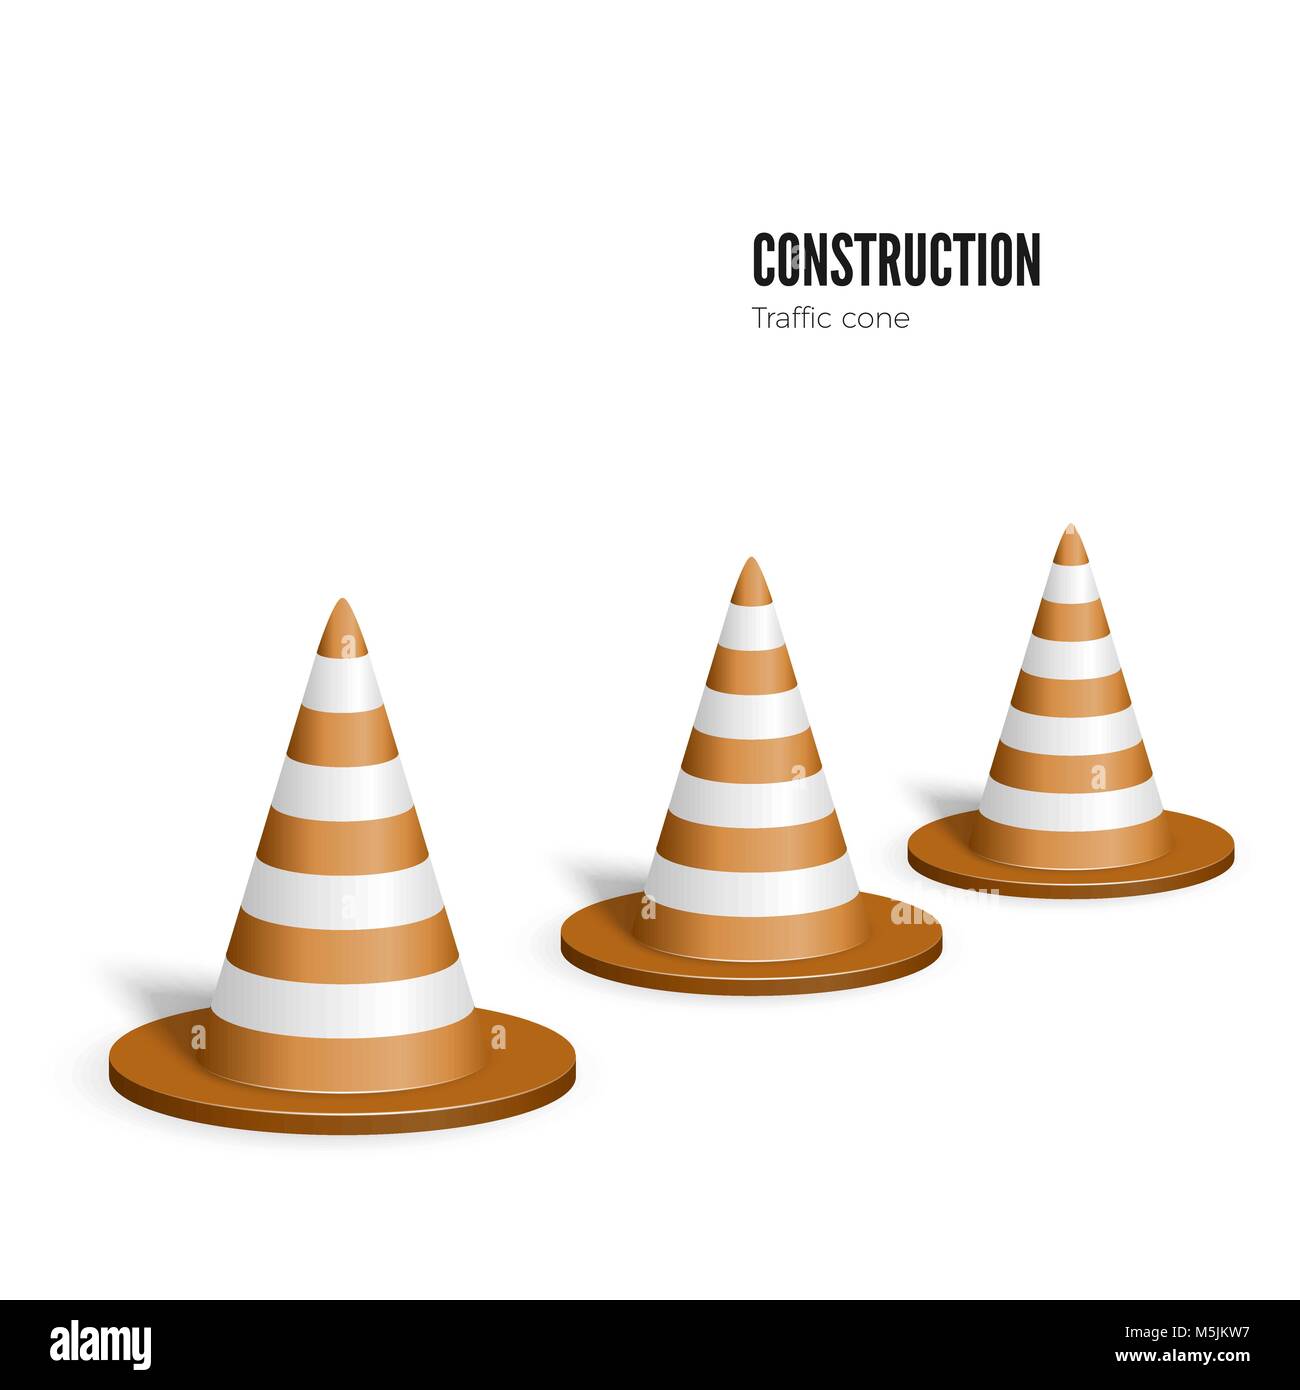 Traffic cone. Construction concept. Vector illustration isolated on white background Stock Vector